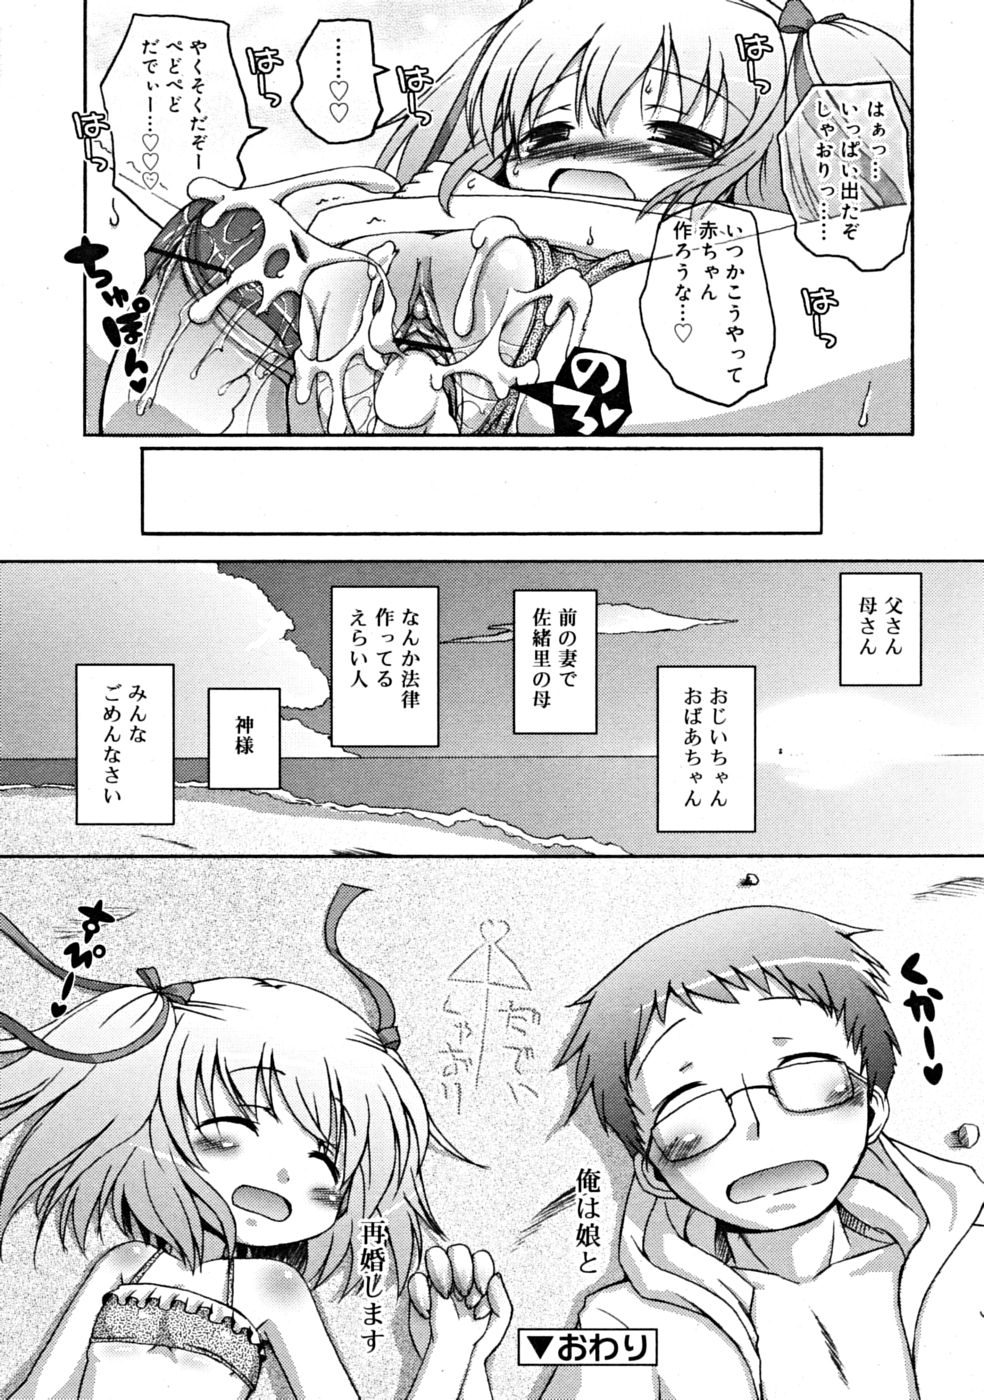 COMIC RiN 2008-09 page 20 full